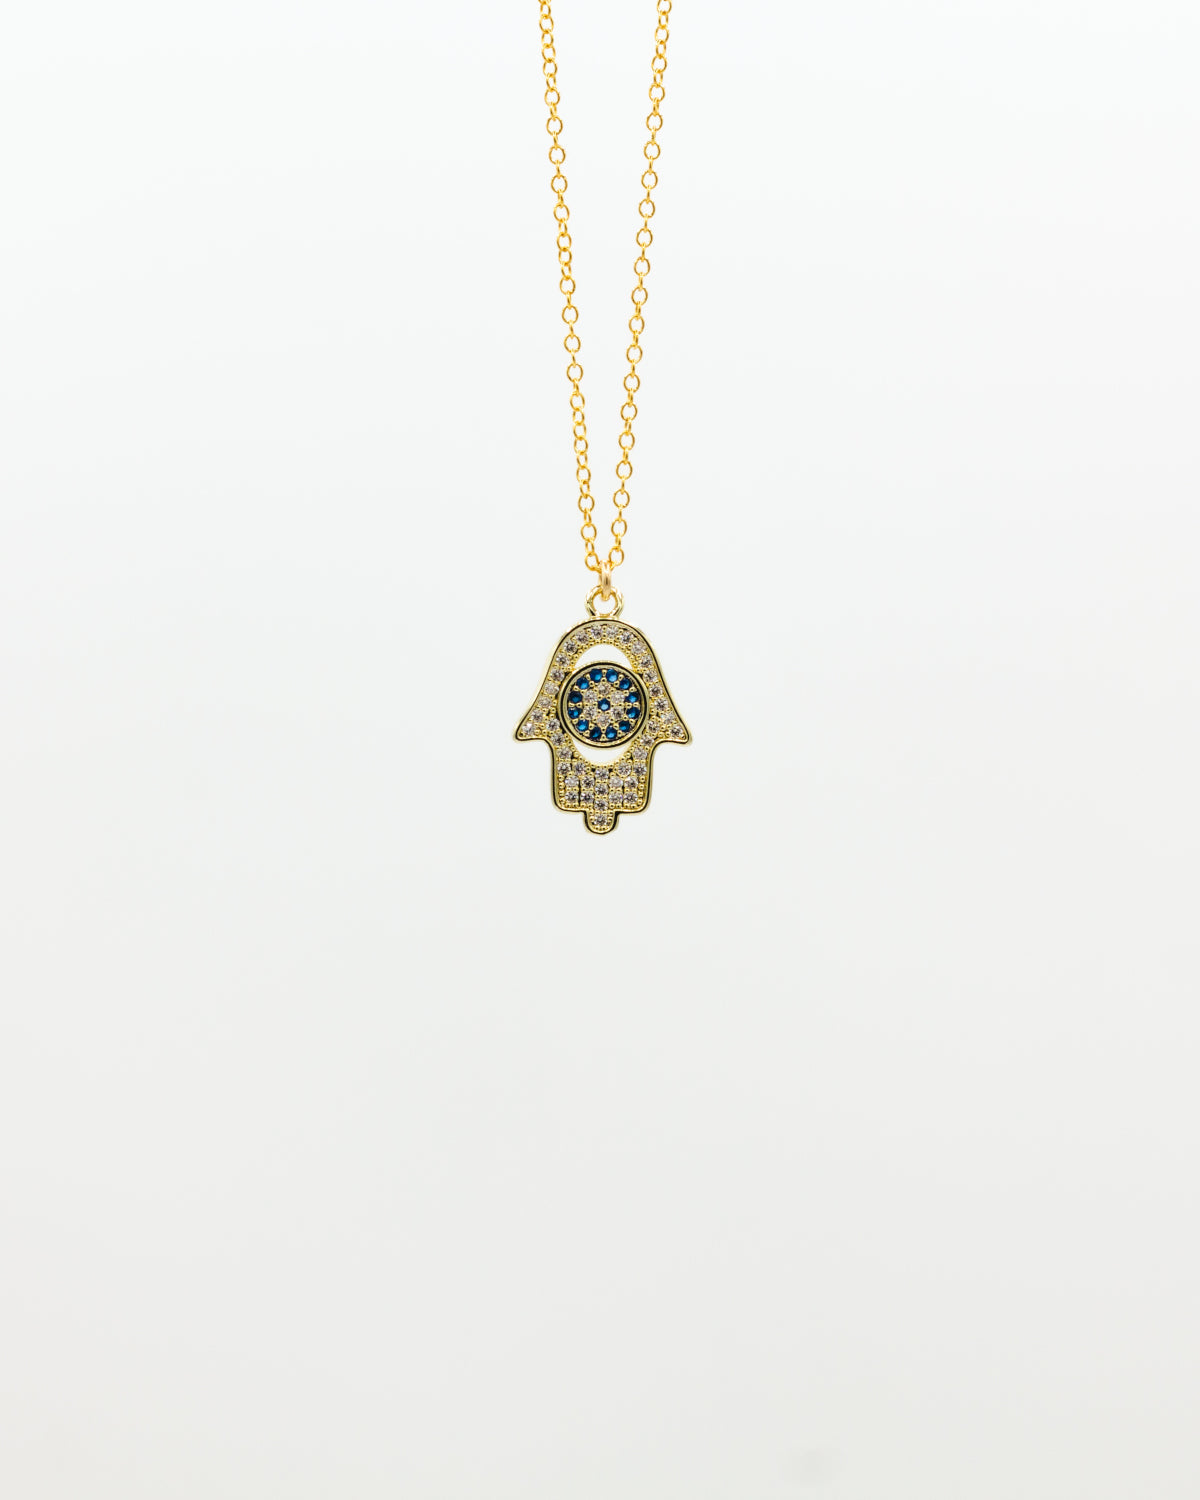 Hamsa Hand Pendant Necklace in 9ct Yellow Gold